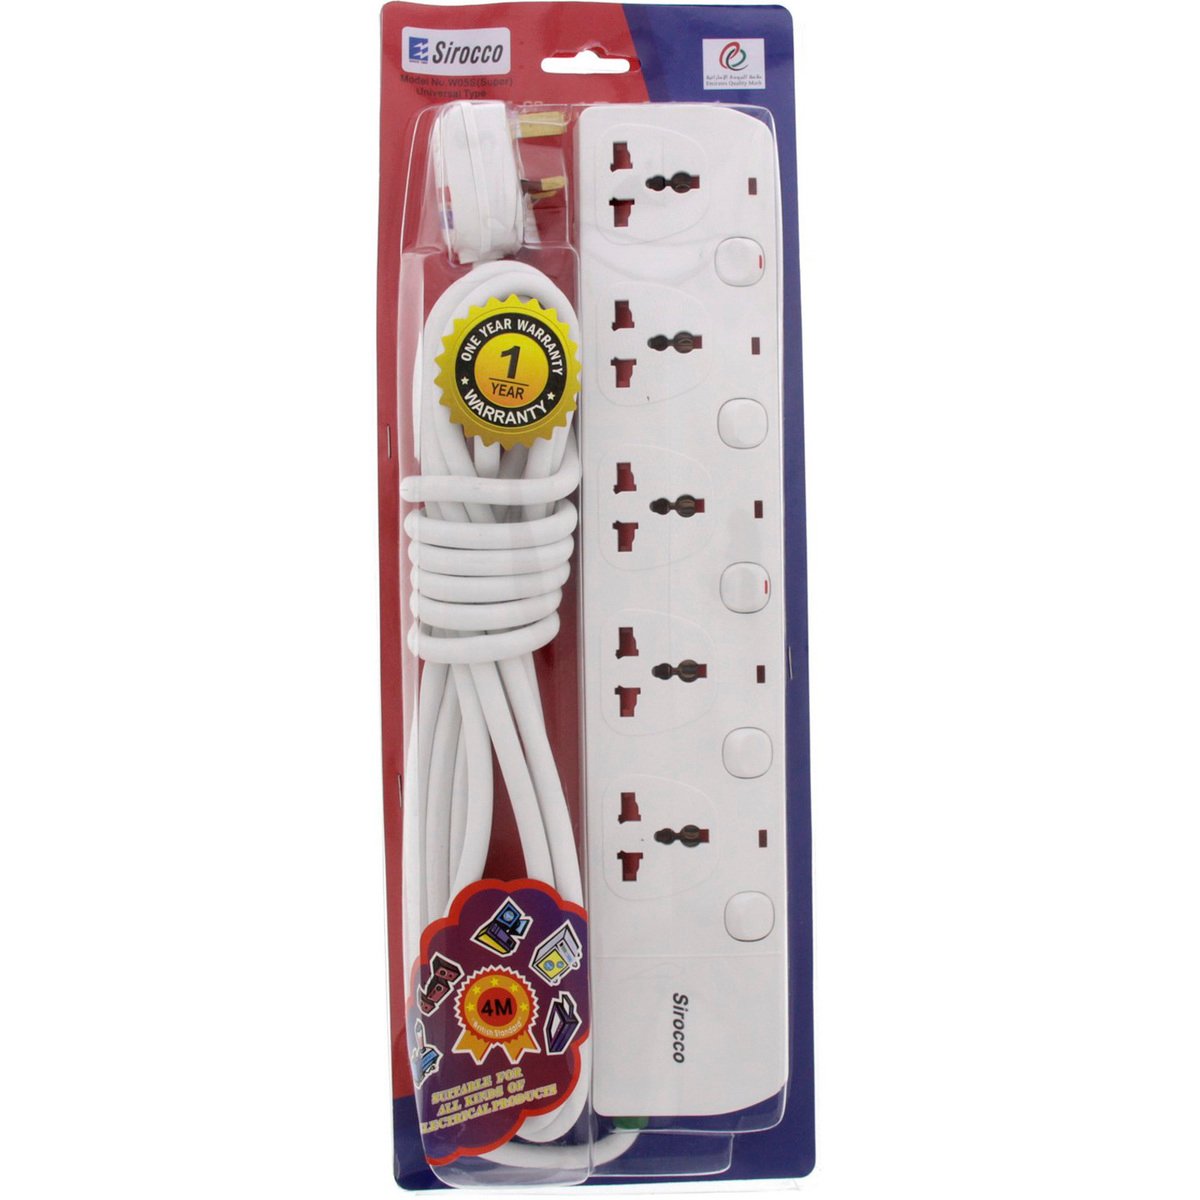 Sirocco Extension Cord 5Way 4Mtr